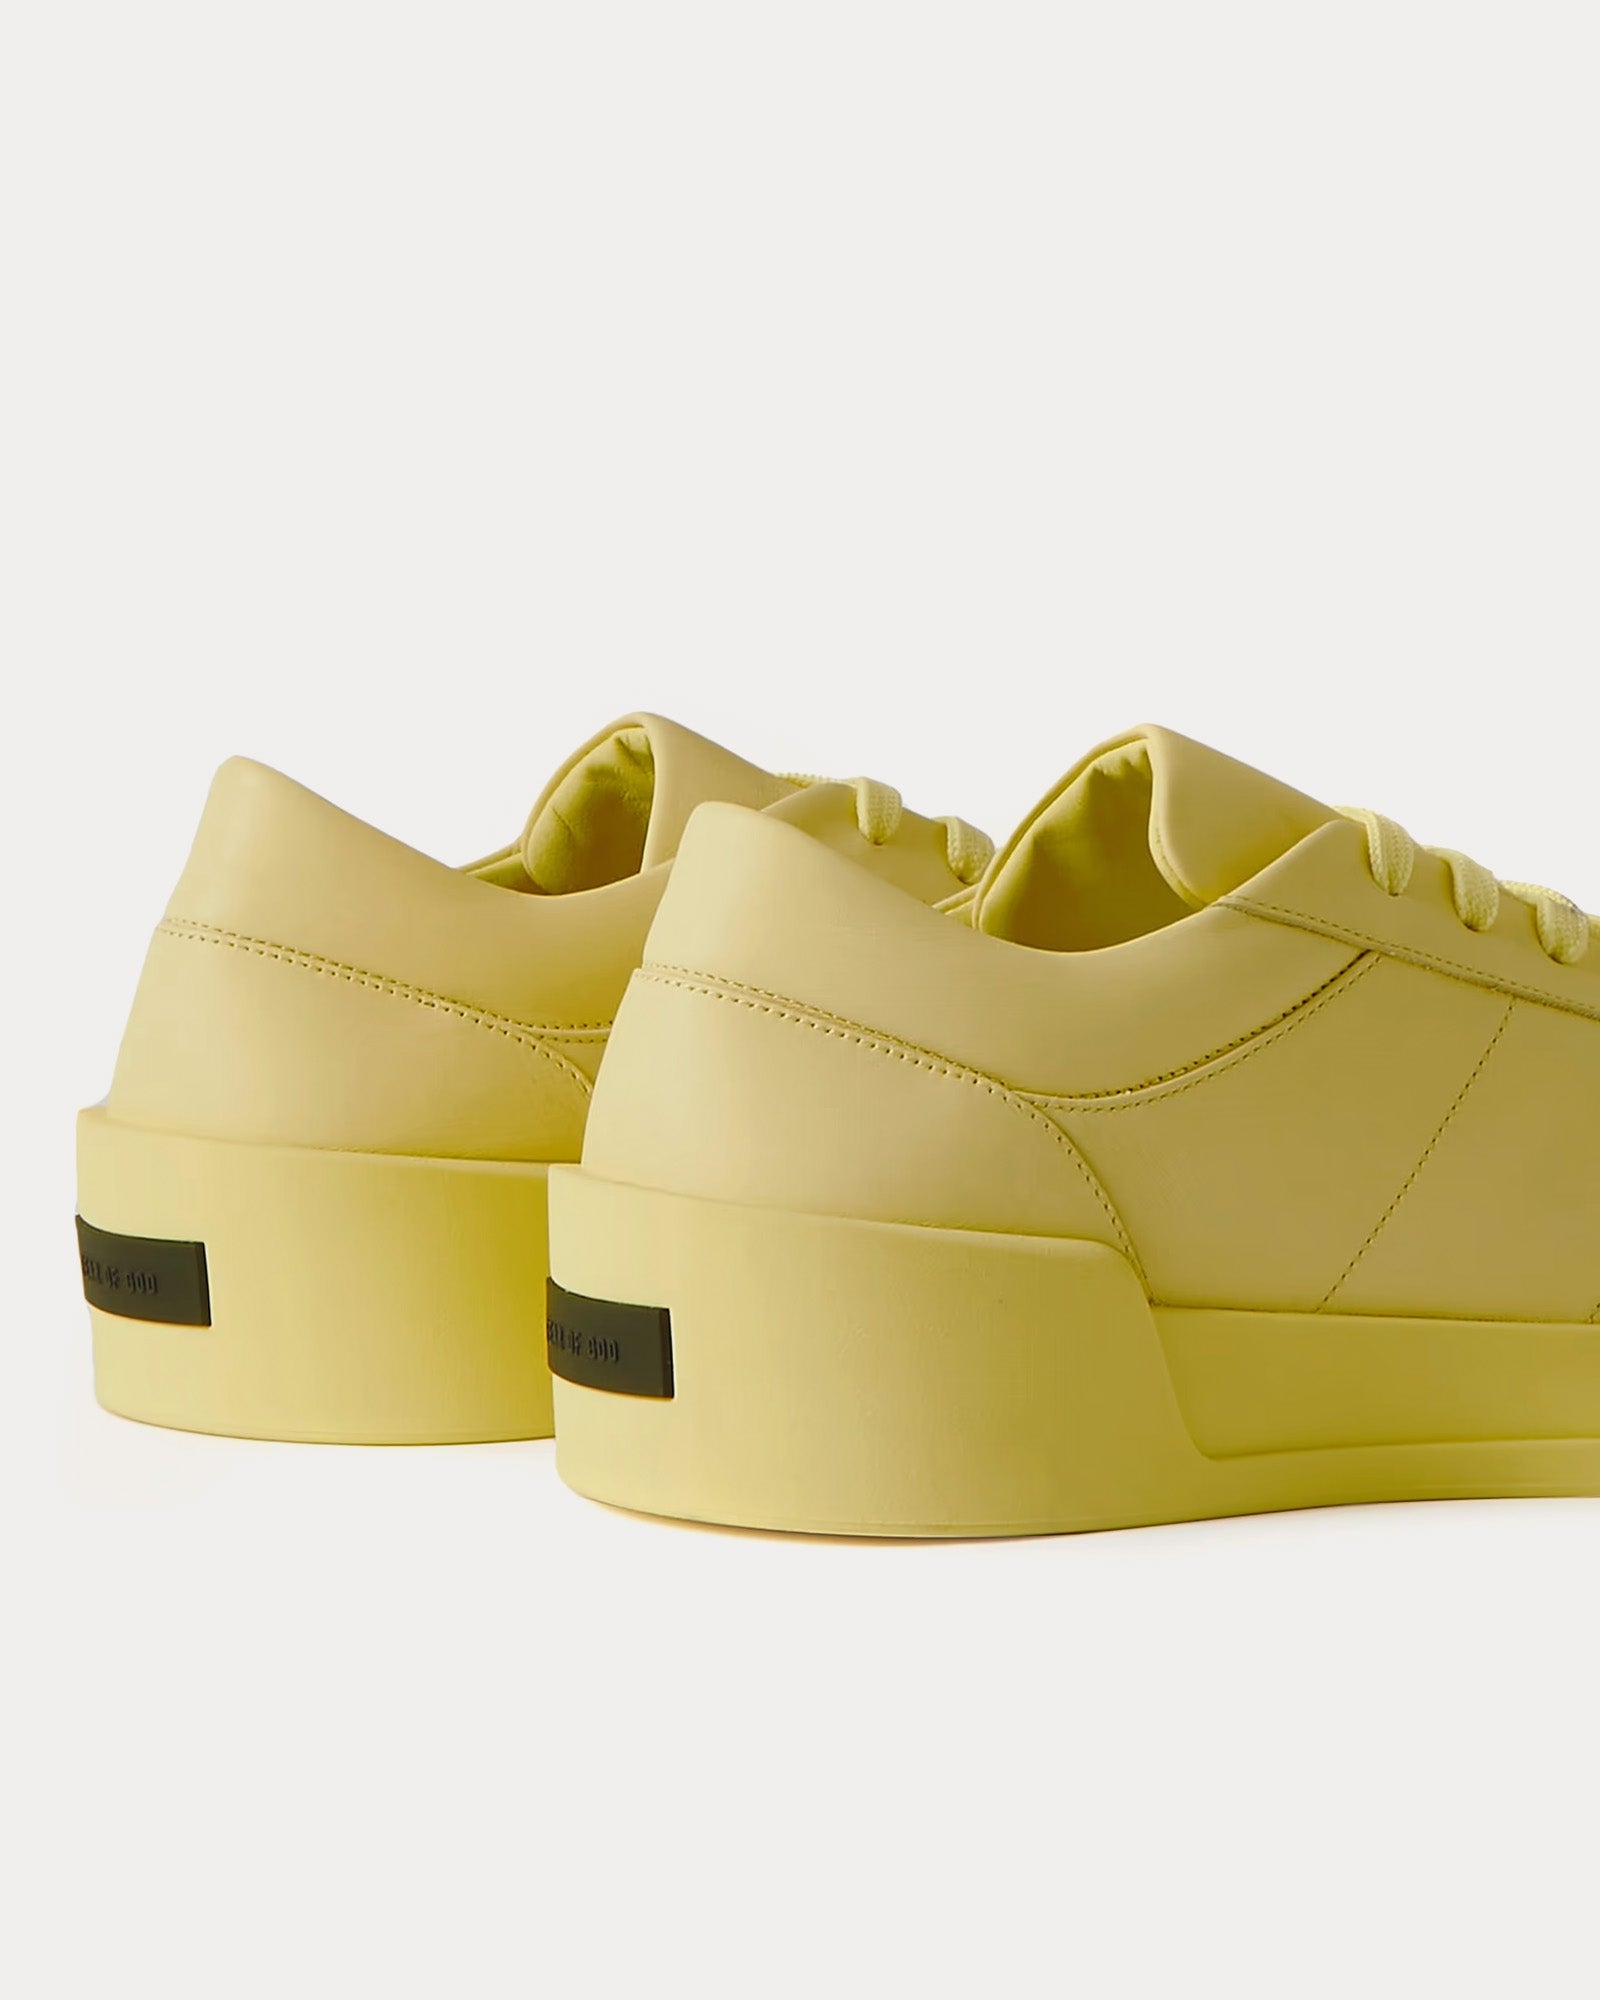 Fear of God - Aerobic Low Yellow Low Top Sneakers